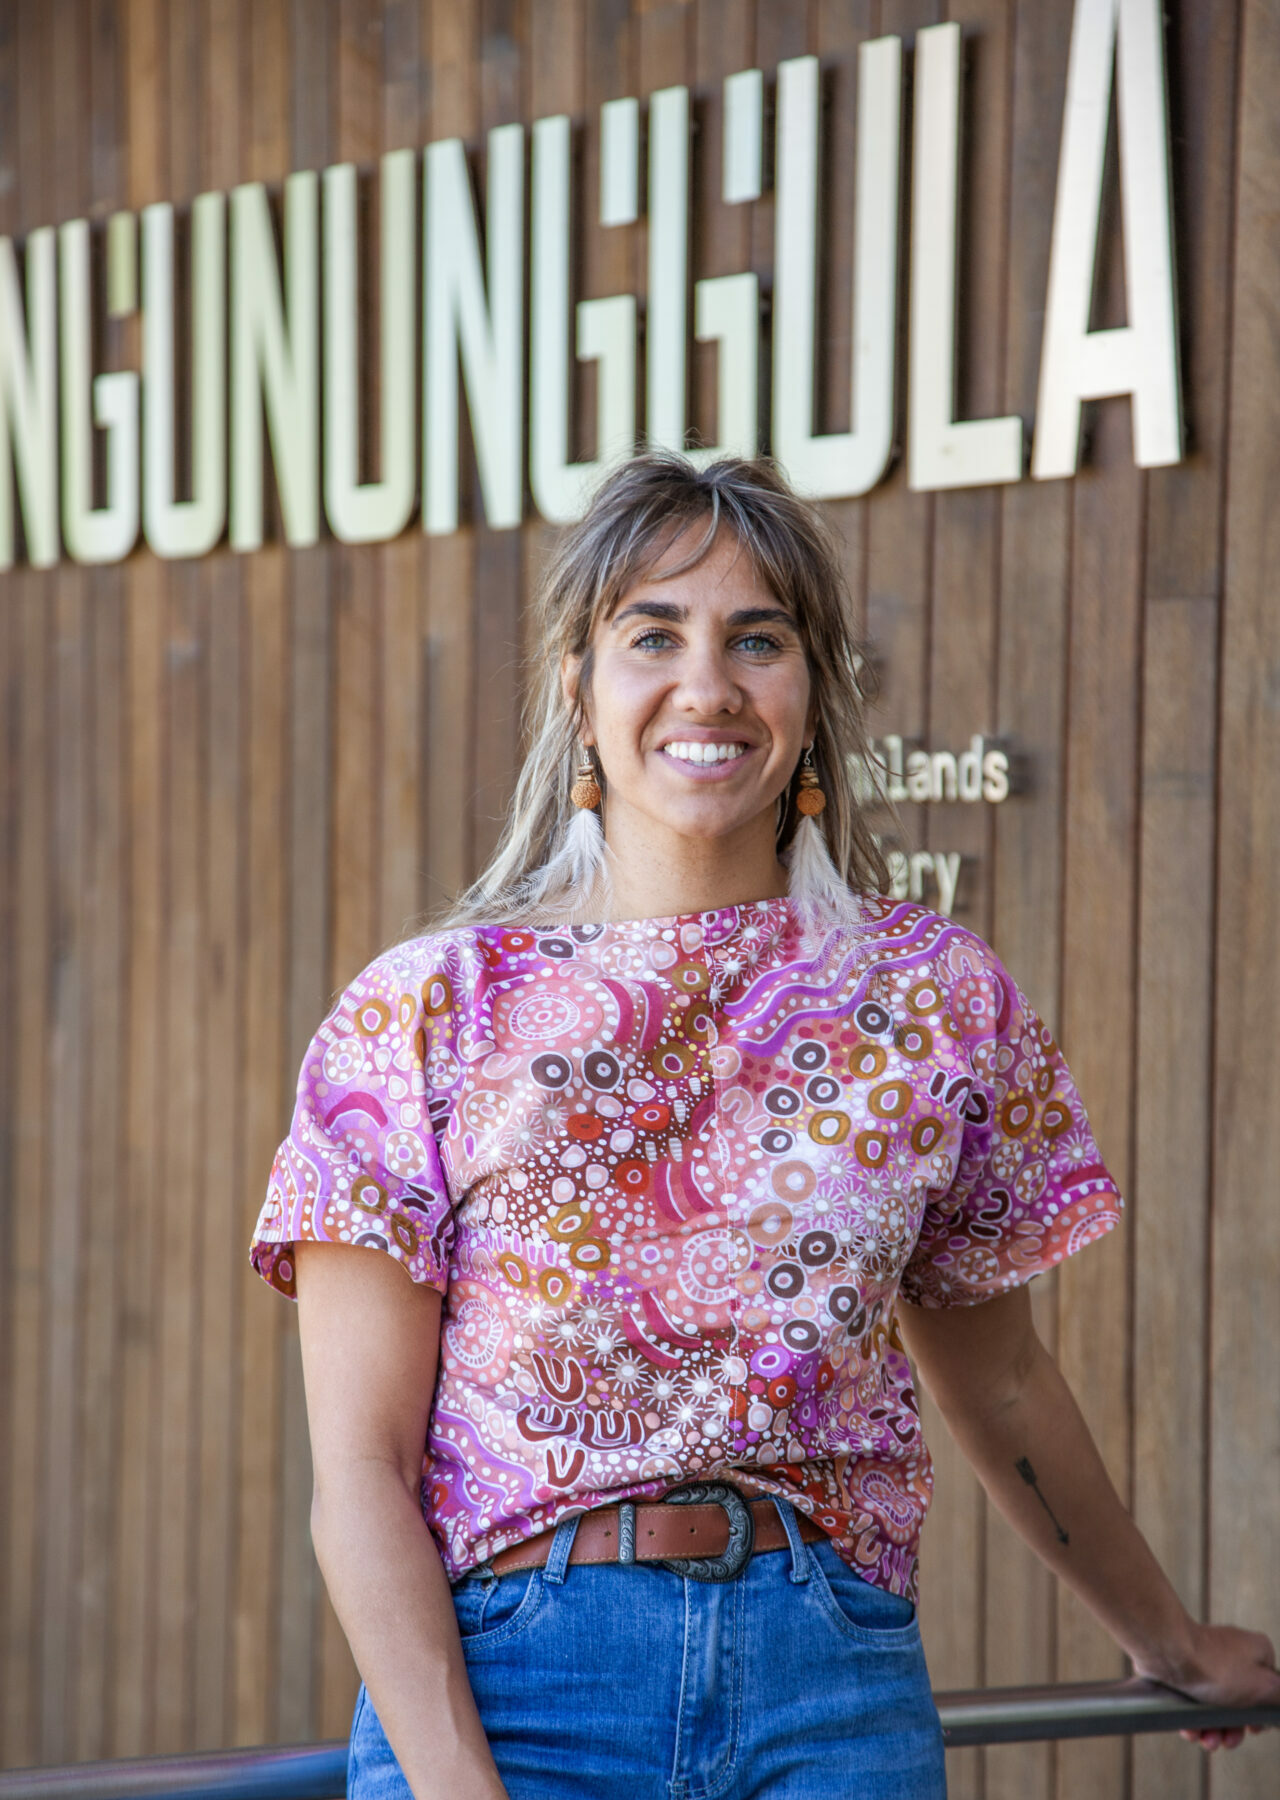 A brown-skinned woman with straight grey-brown hair smiles, leaning against a barrier, wearing a pink top patterned with Aboriginal art